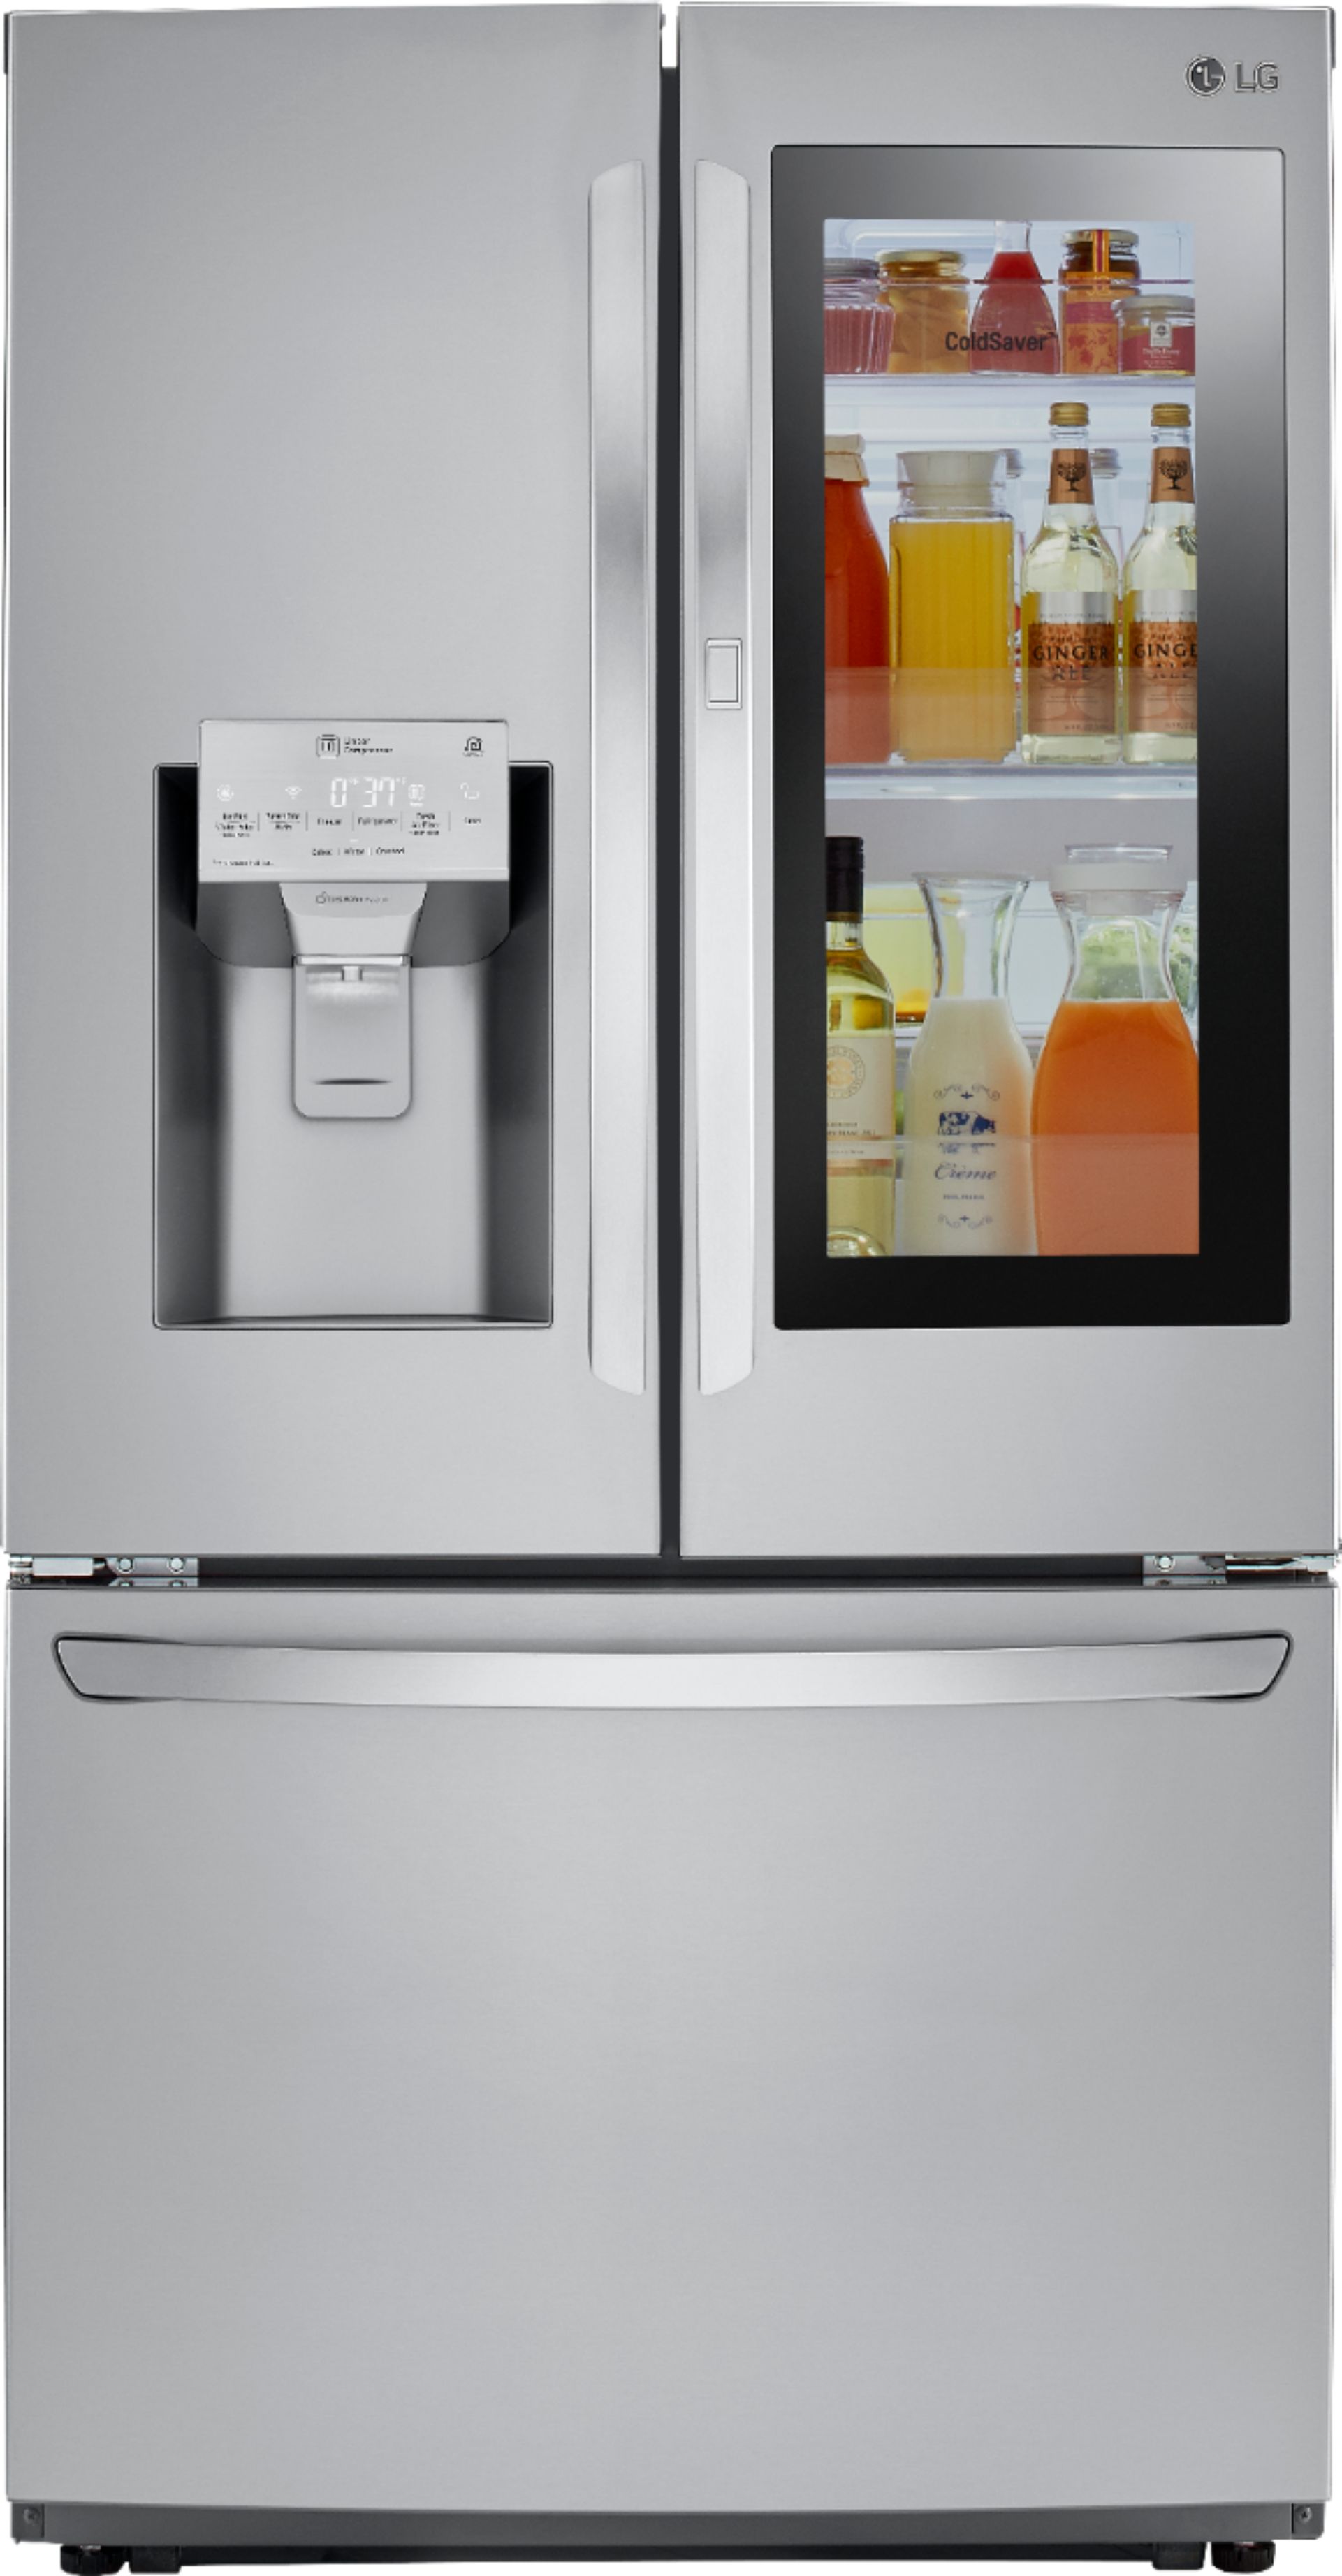 LG – 26 Cu. Ft. French InstaView Door-in-Door Refrigerator with Wifi and Dual Ice Maker – Stainless steel